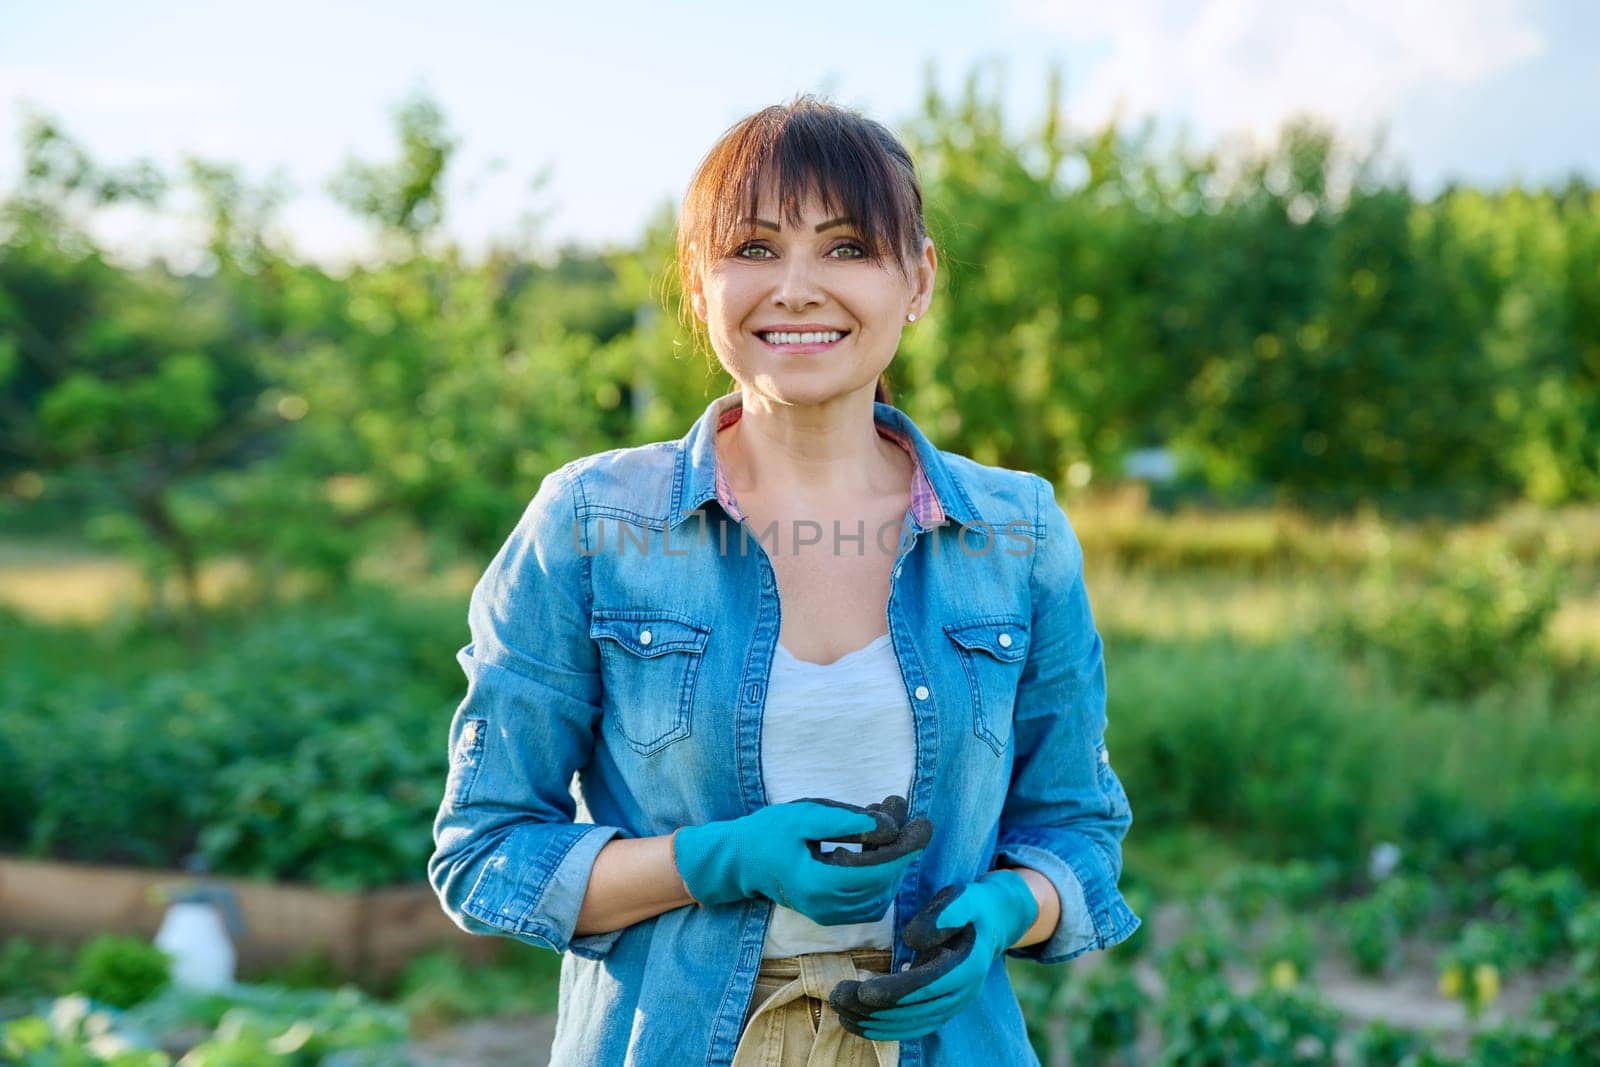 Portrait of smiling woman gardener farmer, nature field with plants vegetables background. Middle-aged female in gloves looking at the camera. Farming, agriculture, small business concept